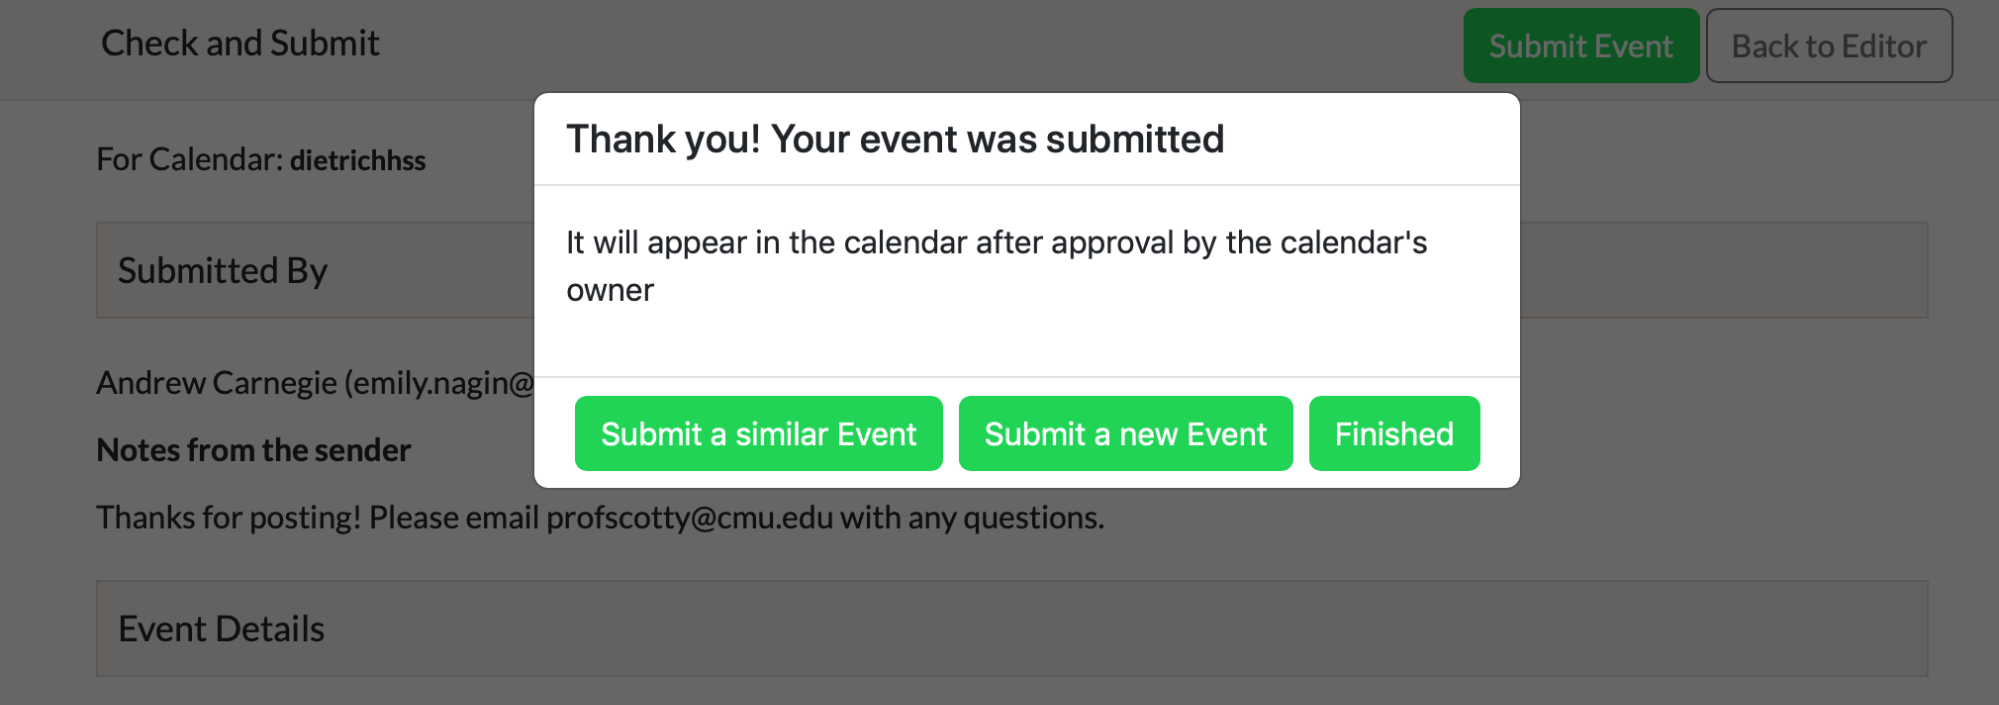 Pop-up screen confirming that the event has been successfully submitted.